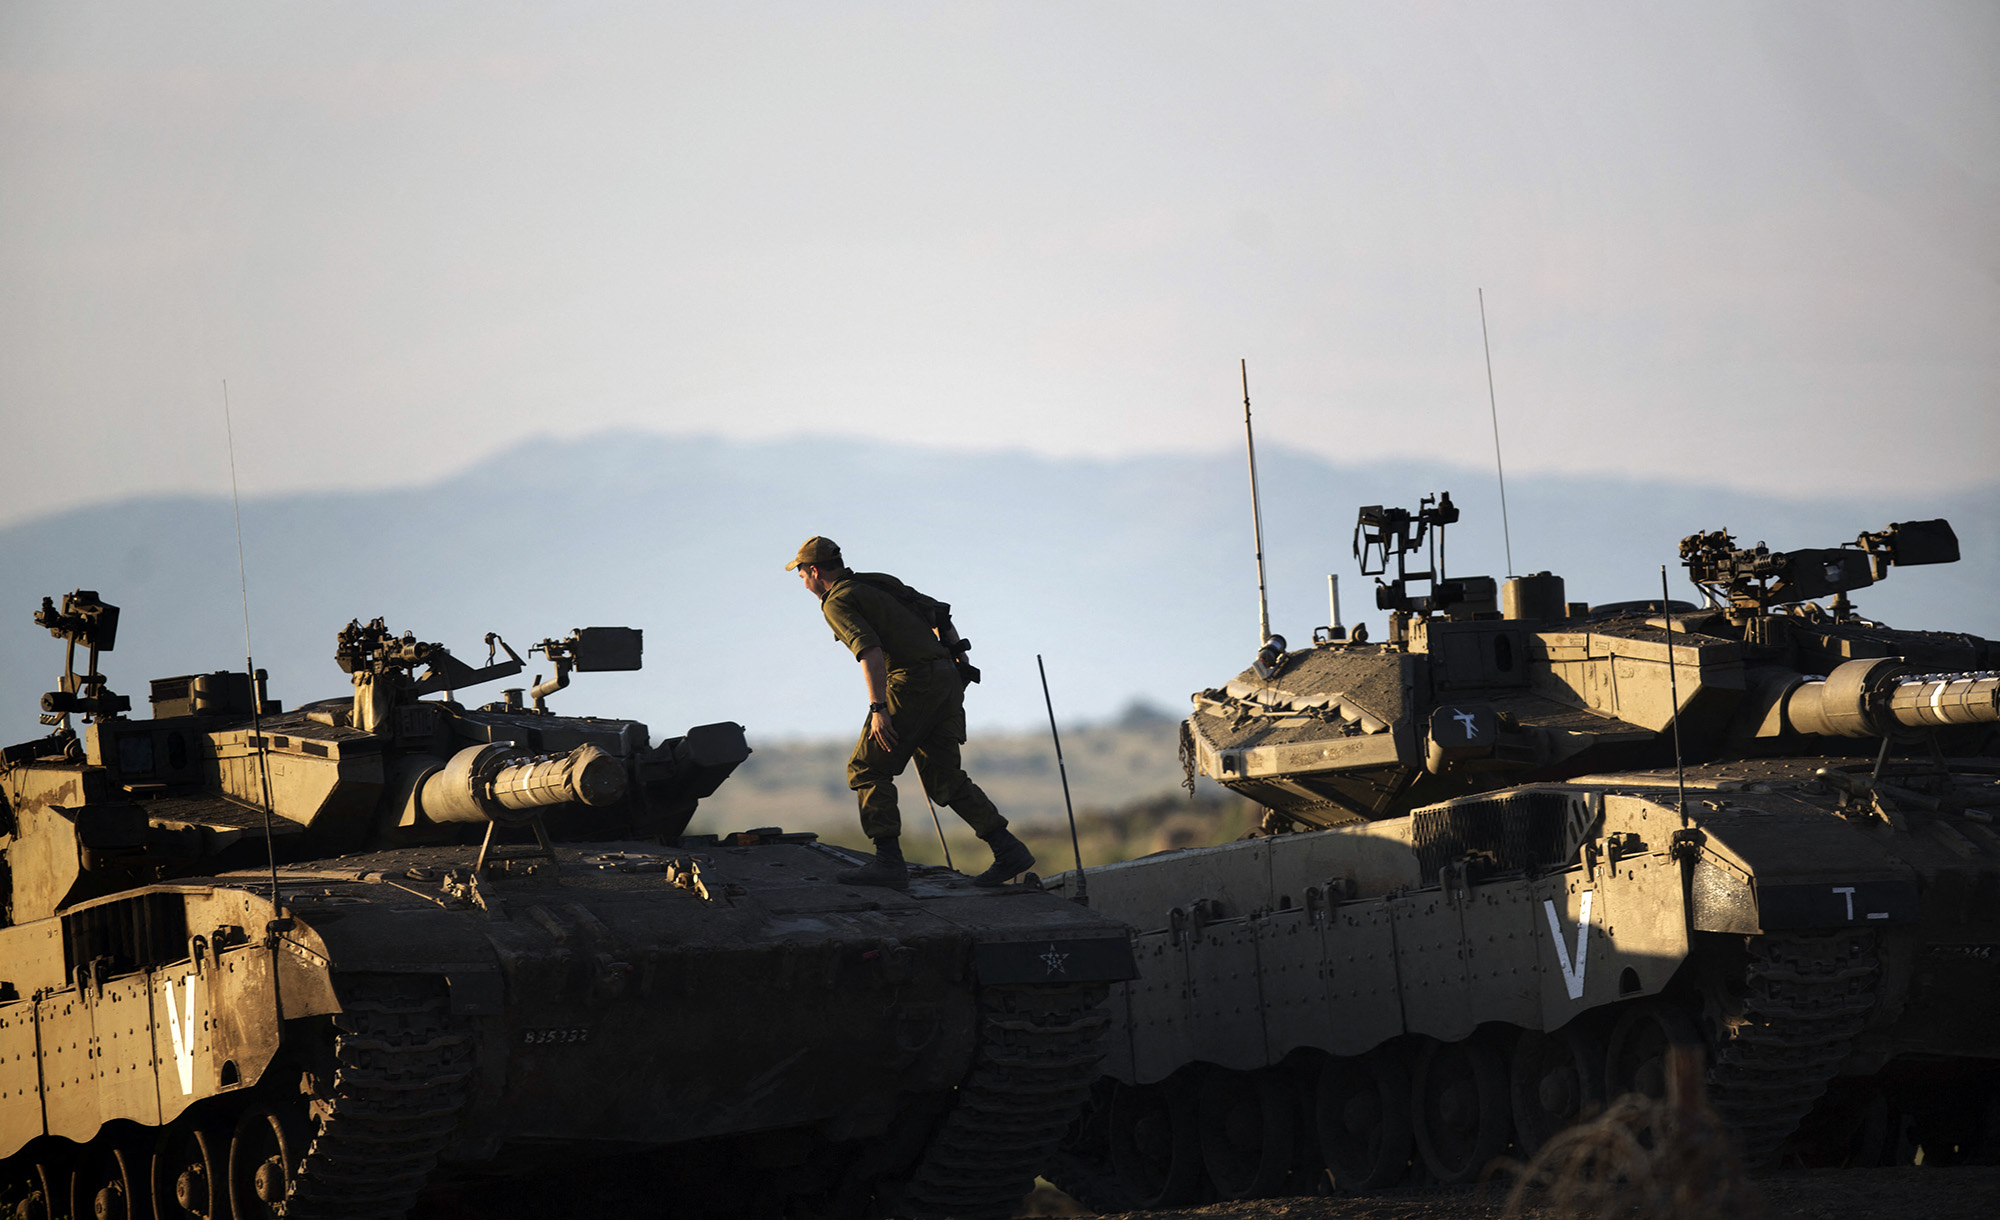 
An Israeli soldier stands on top of a Merkava tank in the Golan Heights on May 5, 2013. MENAHEM KAHANA/AFP via Getty Images.






